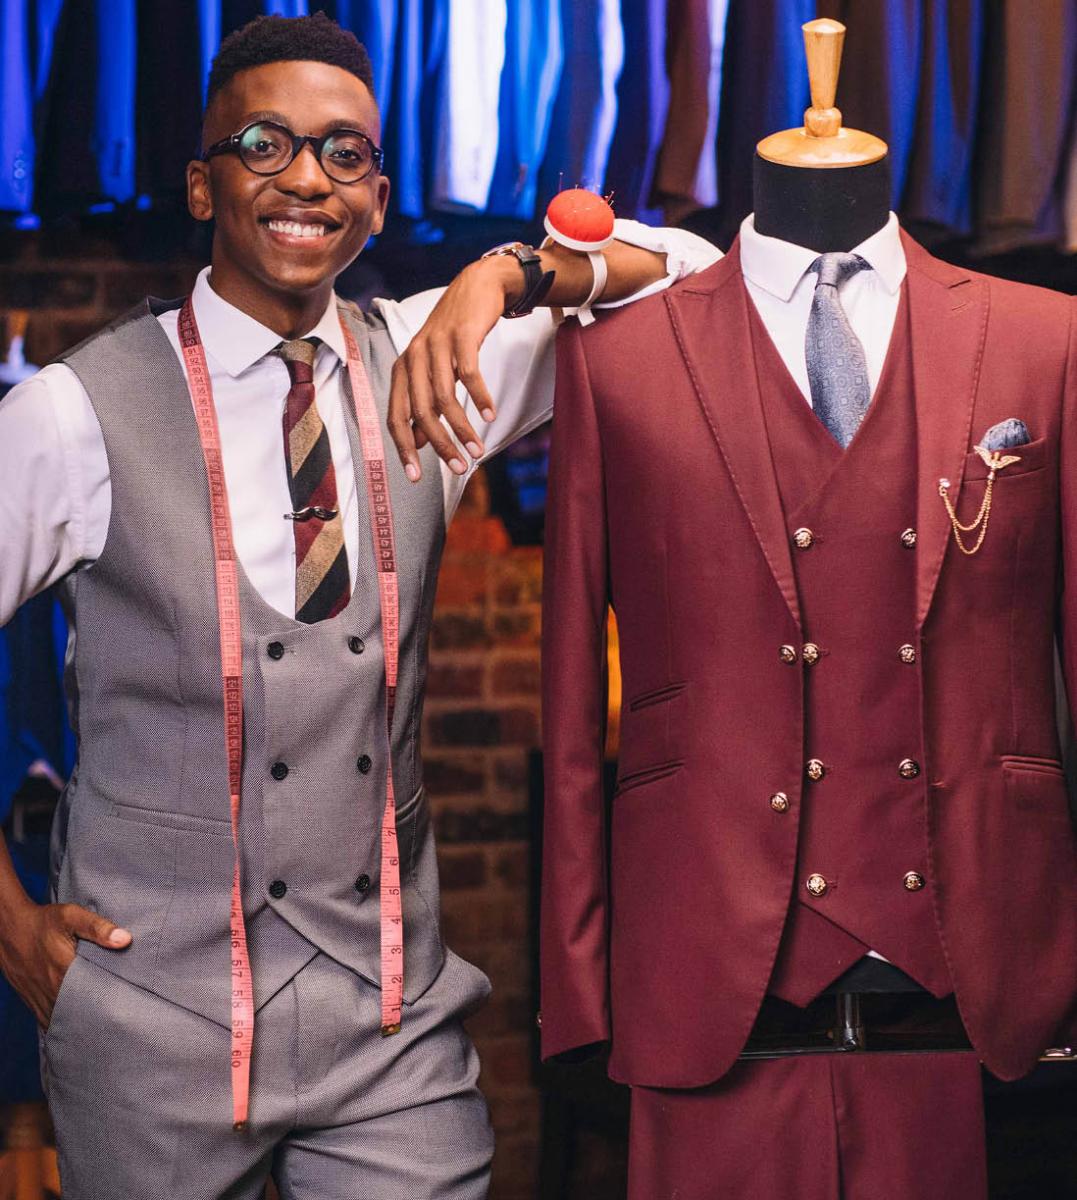 Nkululeko Lehapa is all suited up for success.